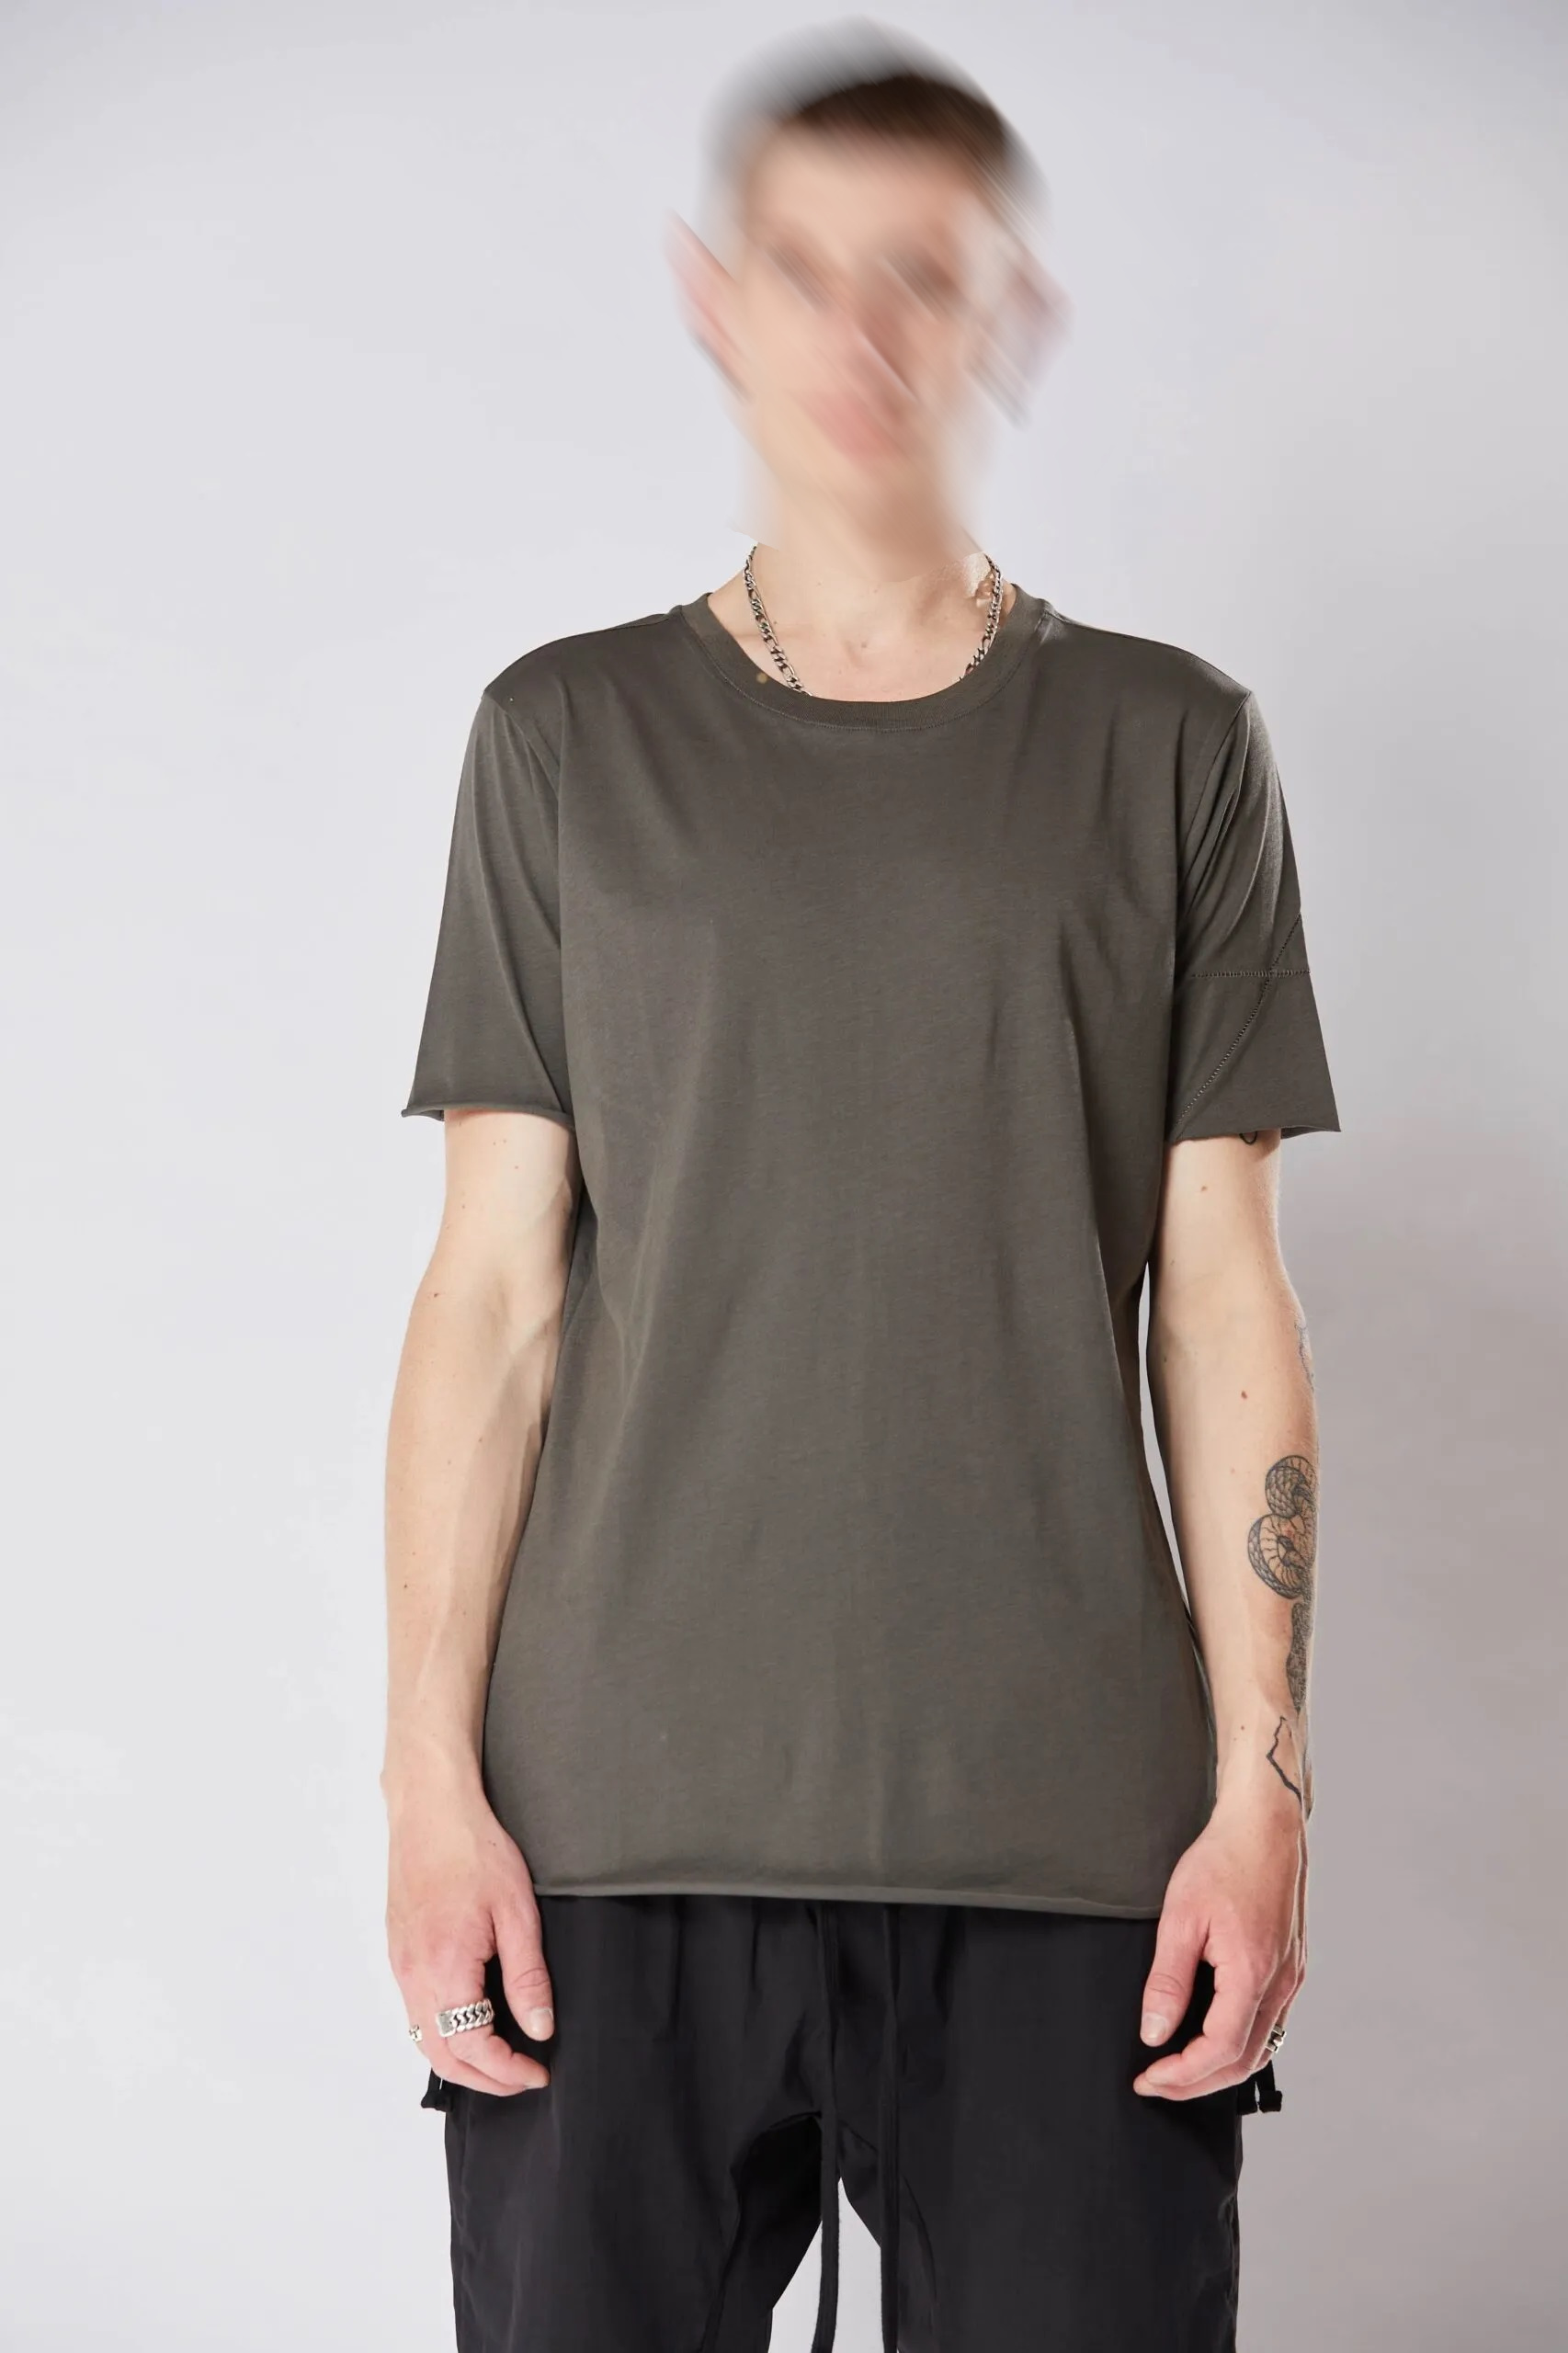 THOM KROM T-Shirt in Ivy Green S